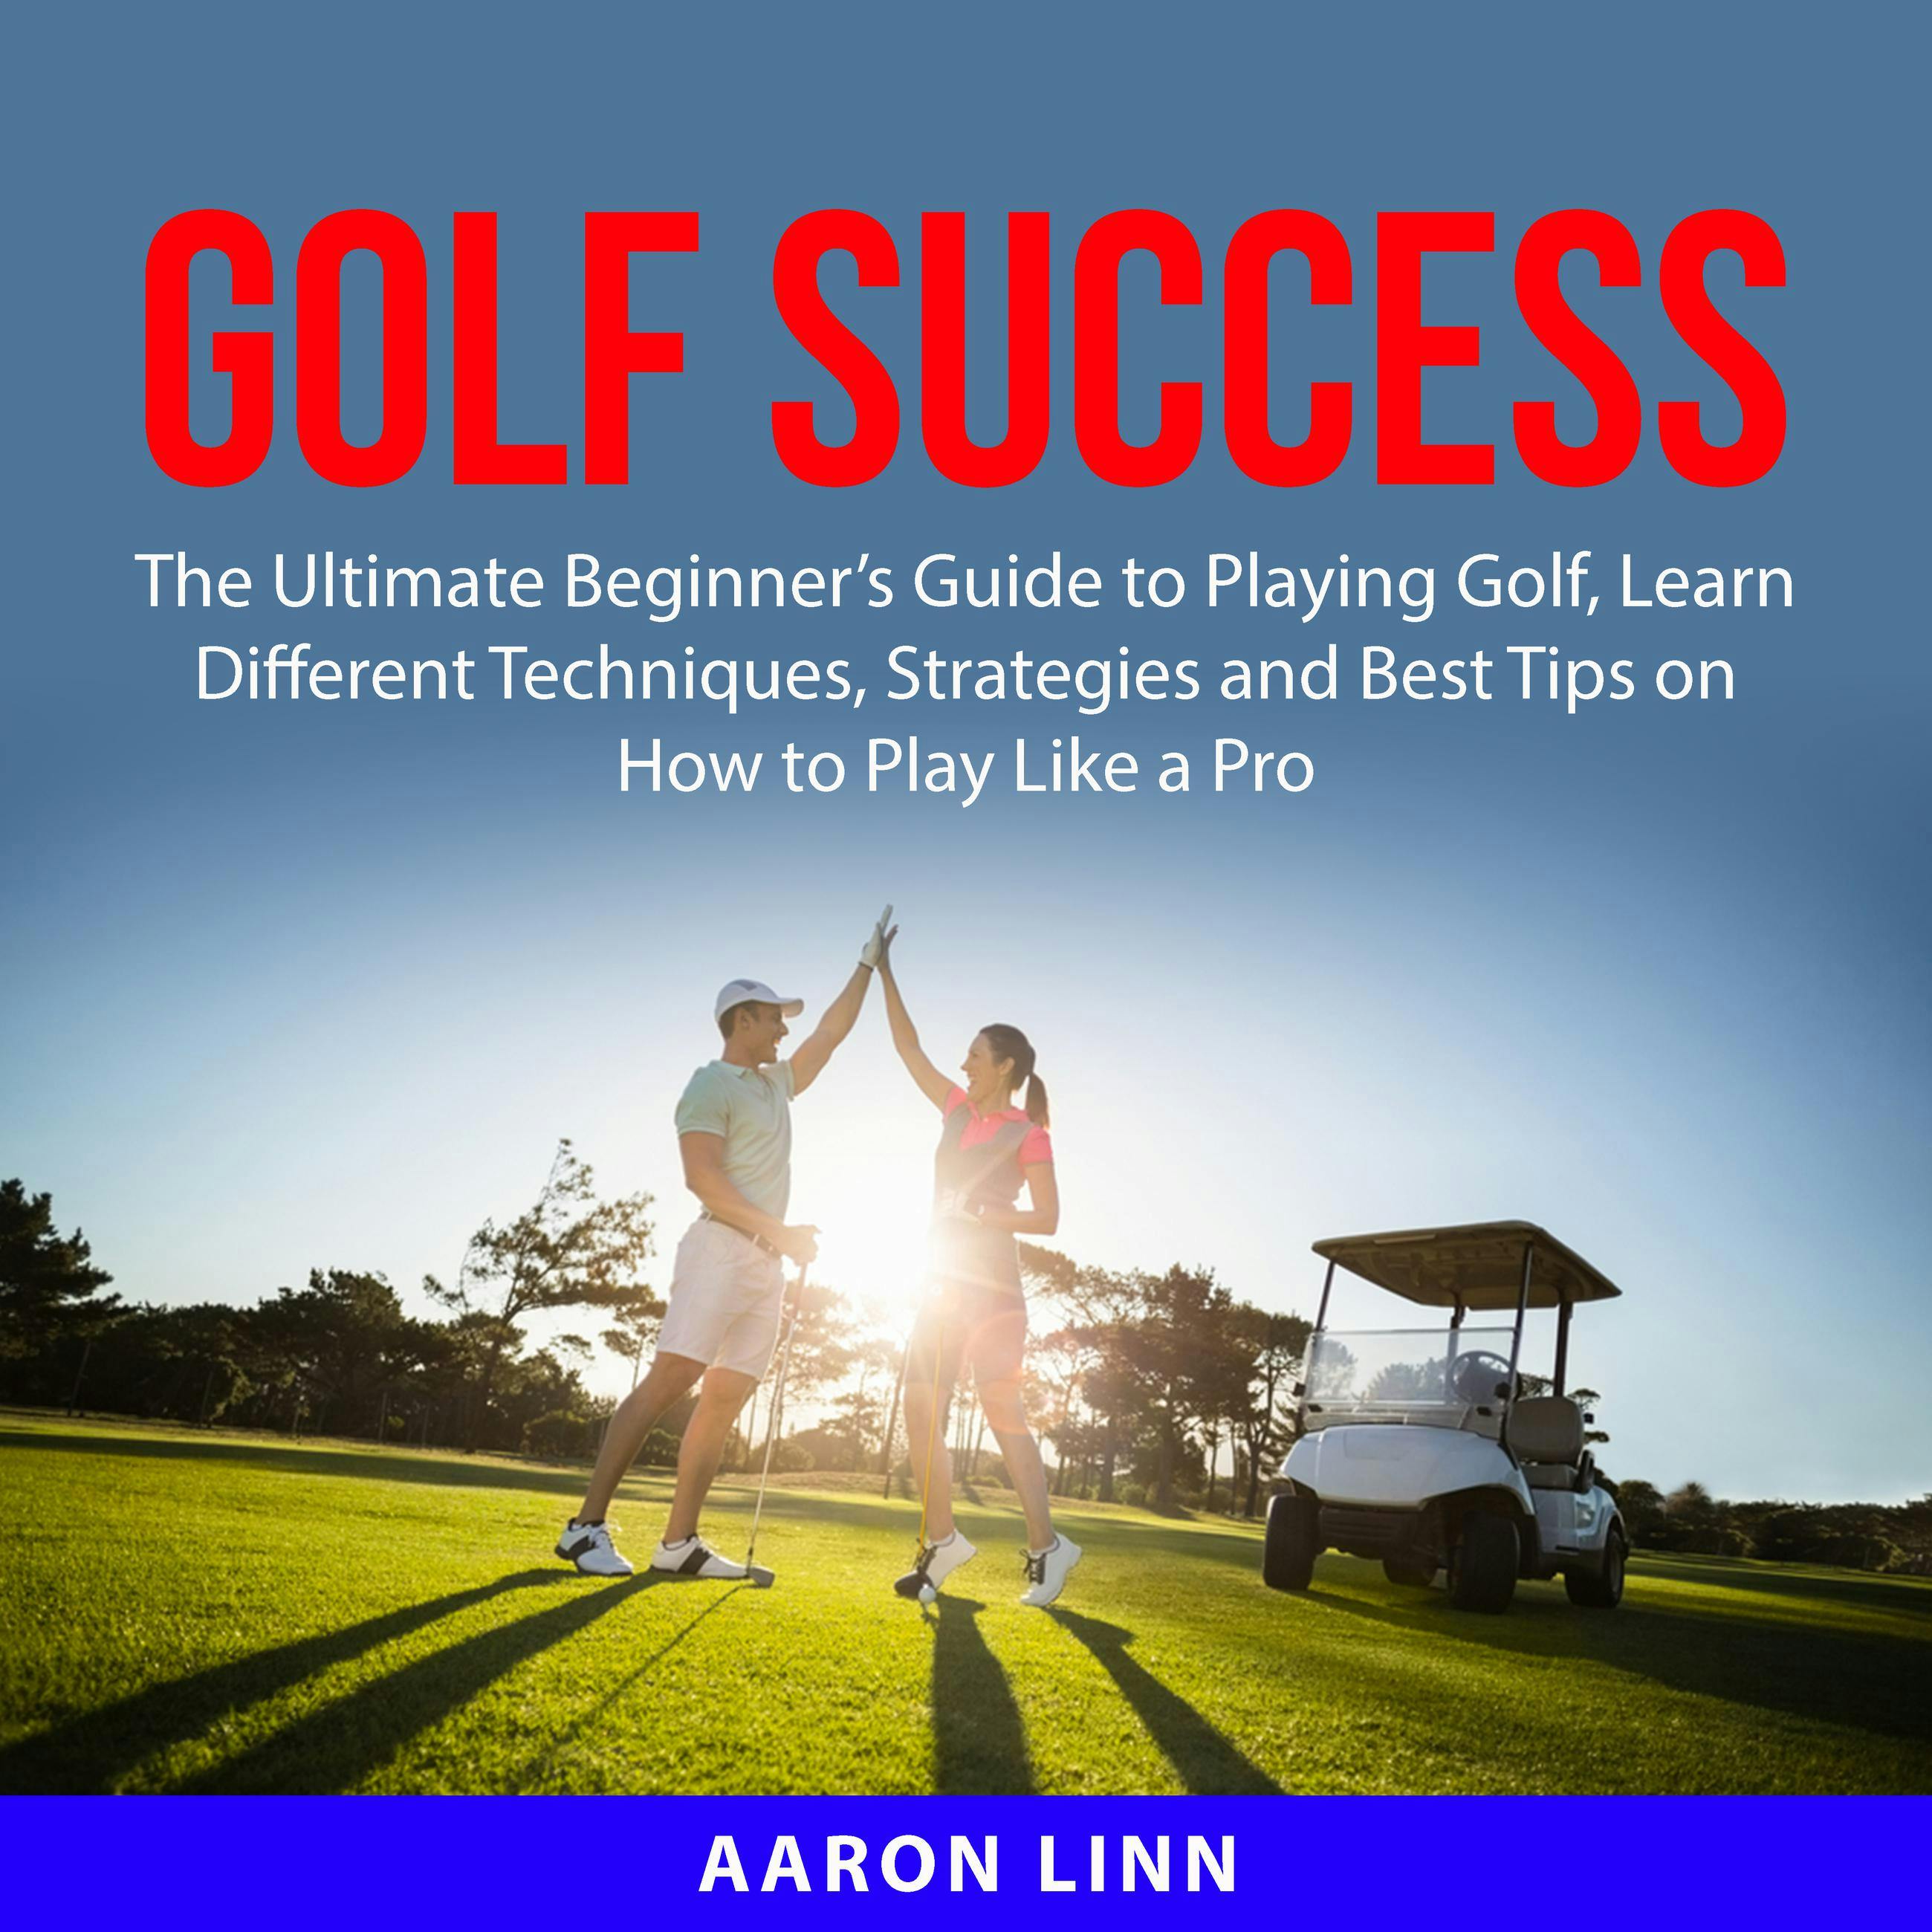 Golf Success: The Ultimate Beginner’s Guide to Playing Golf, Learn Different Techniques, Strategies and Best Tips on How to Play Like a Pro - undefined